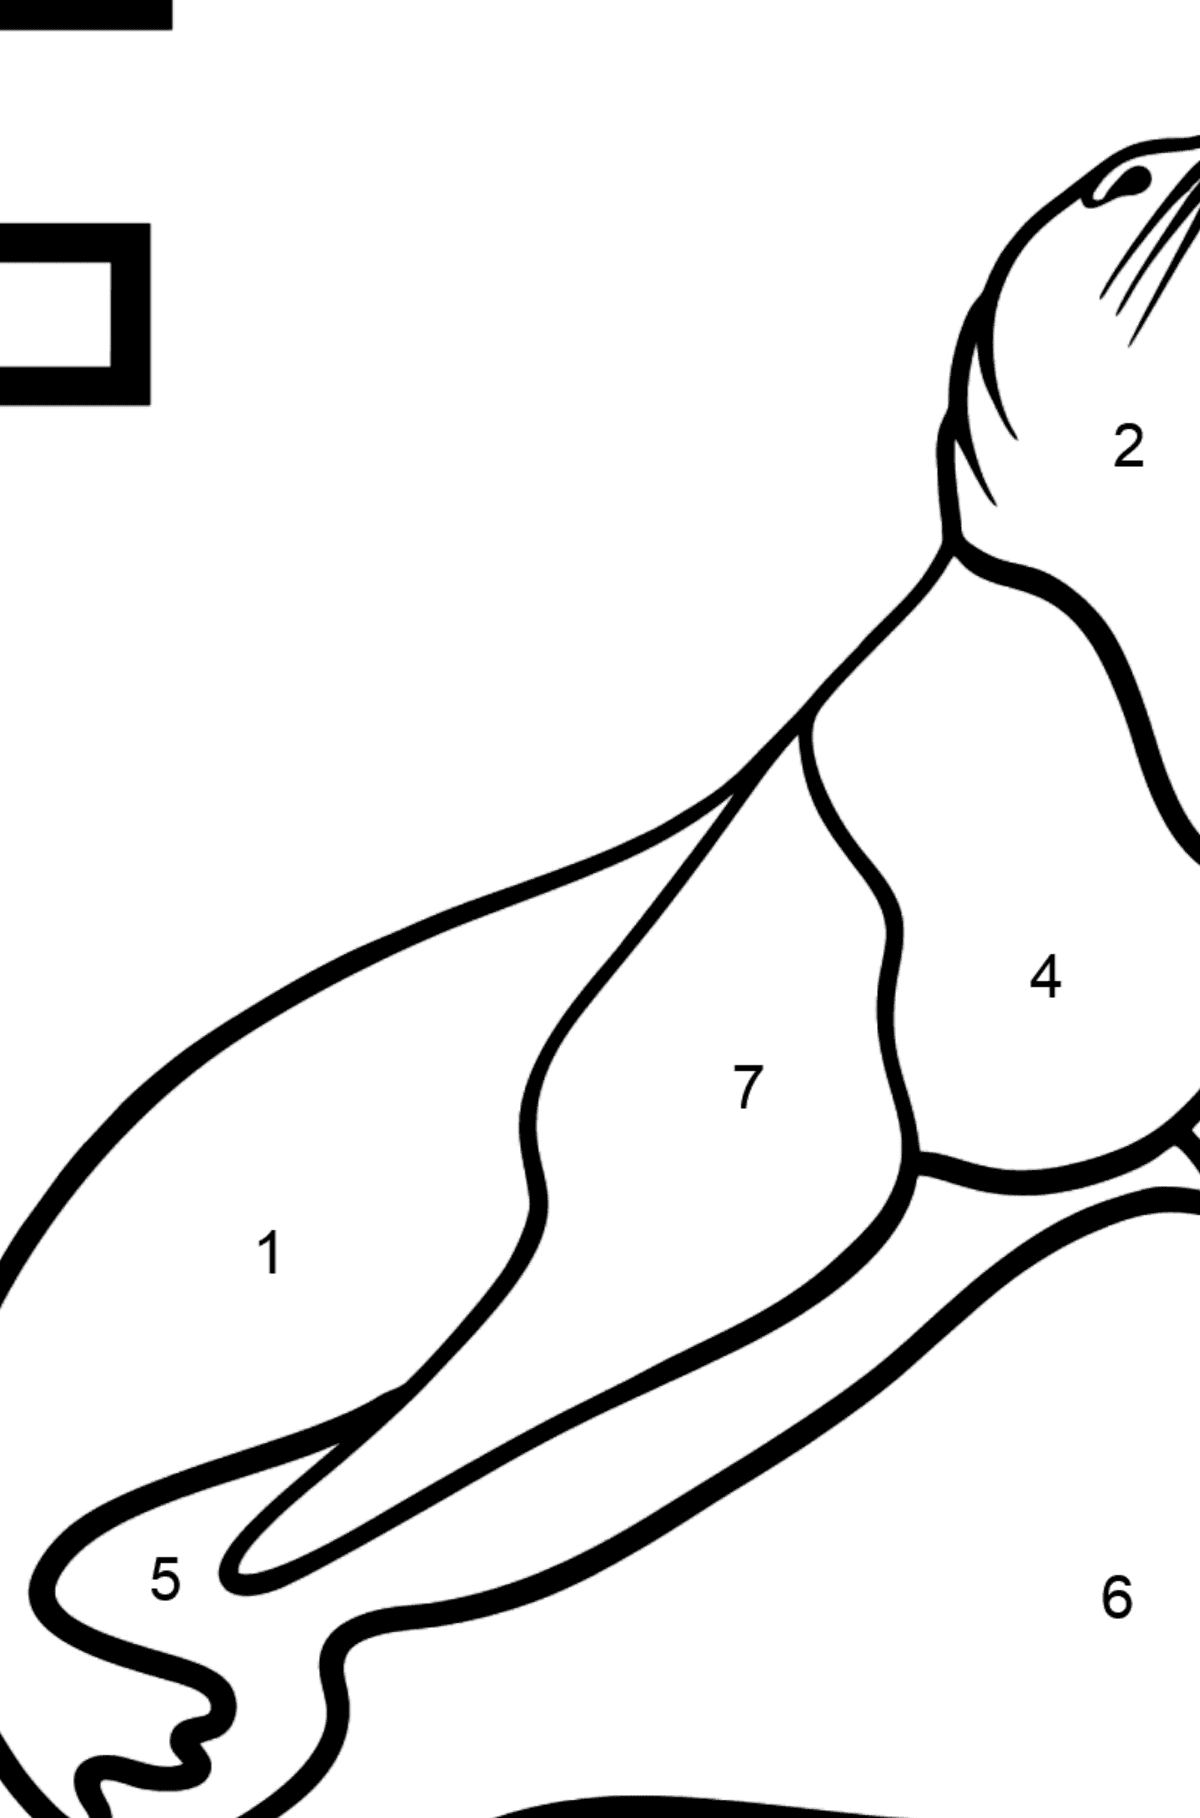 Spanish Letter F coloring pages - FOCA - Coloring by Numbers for Kids